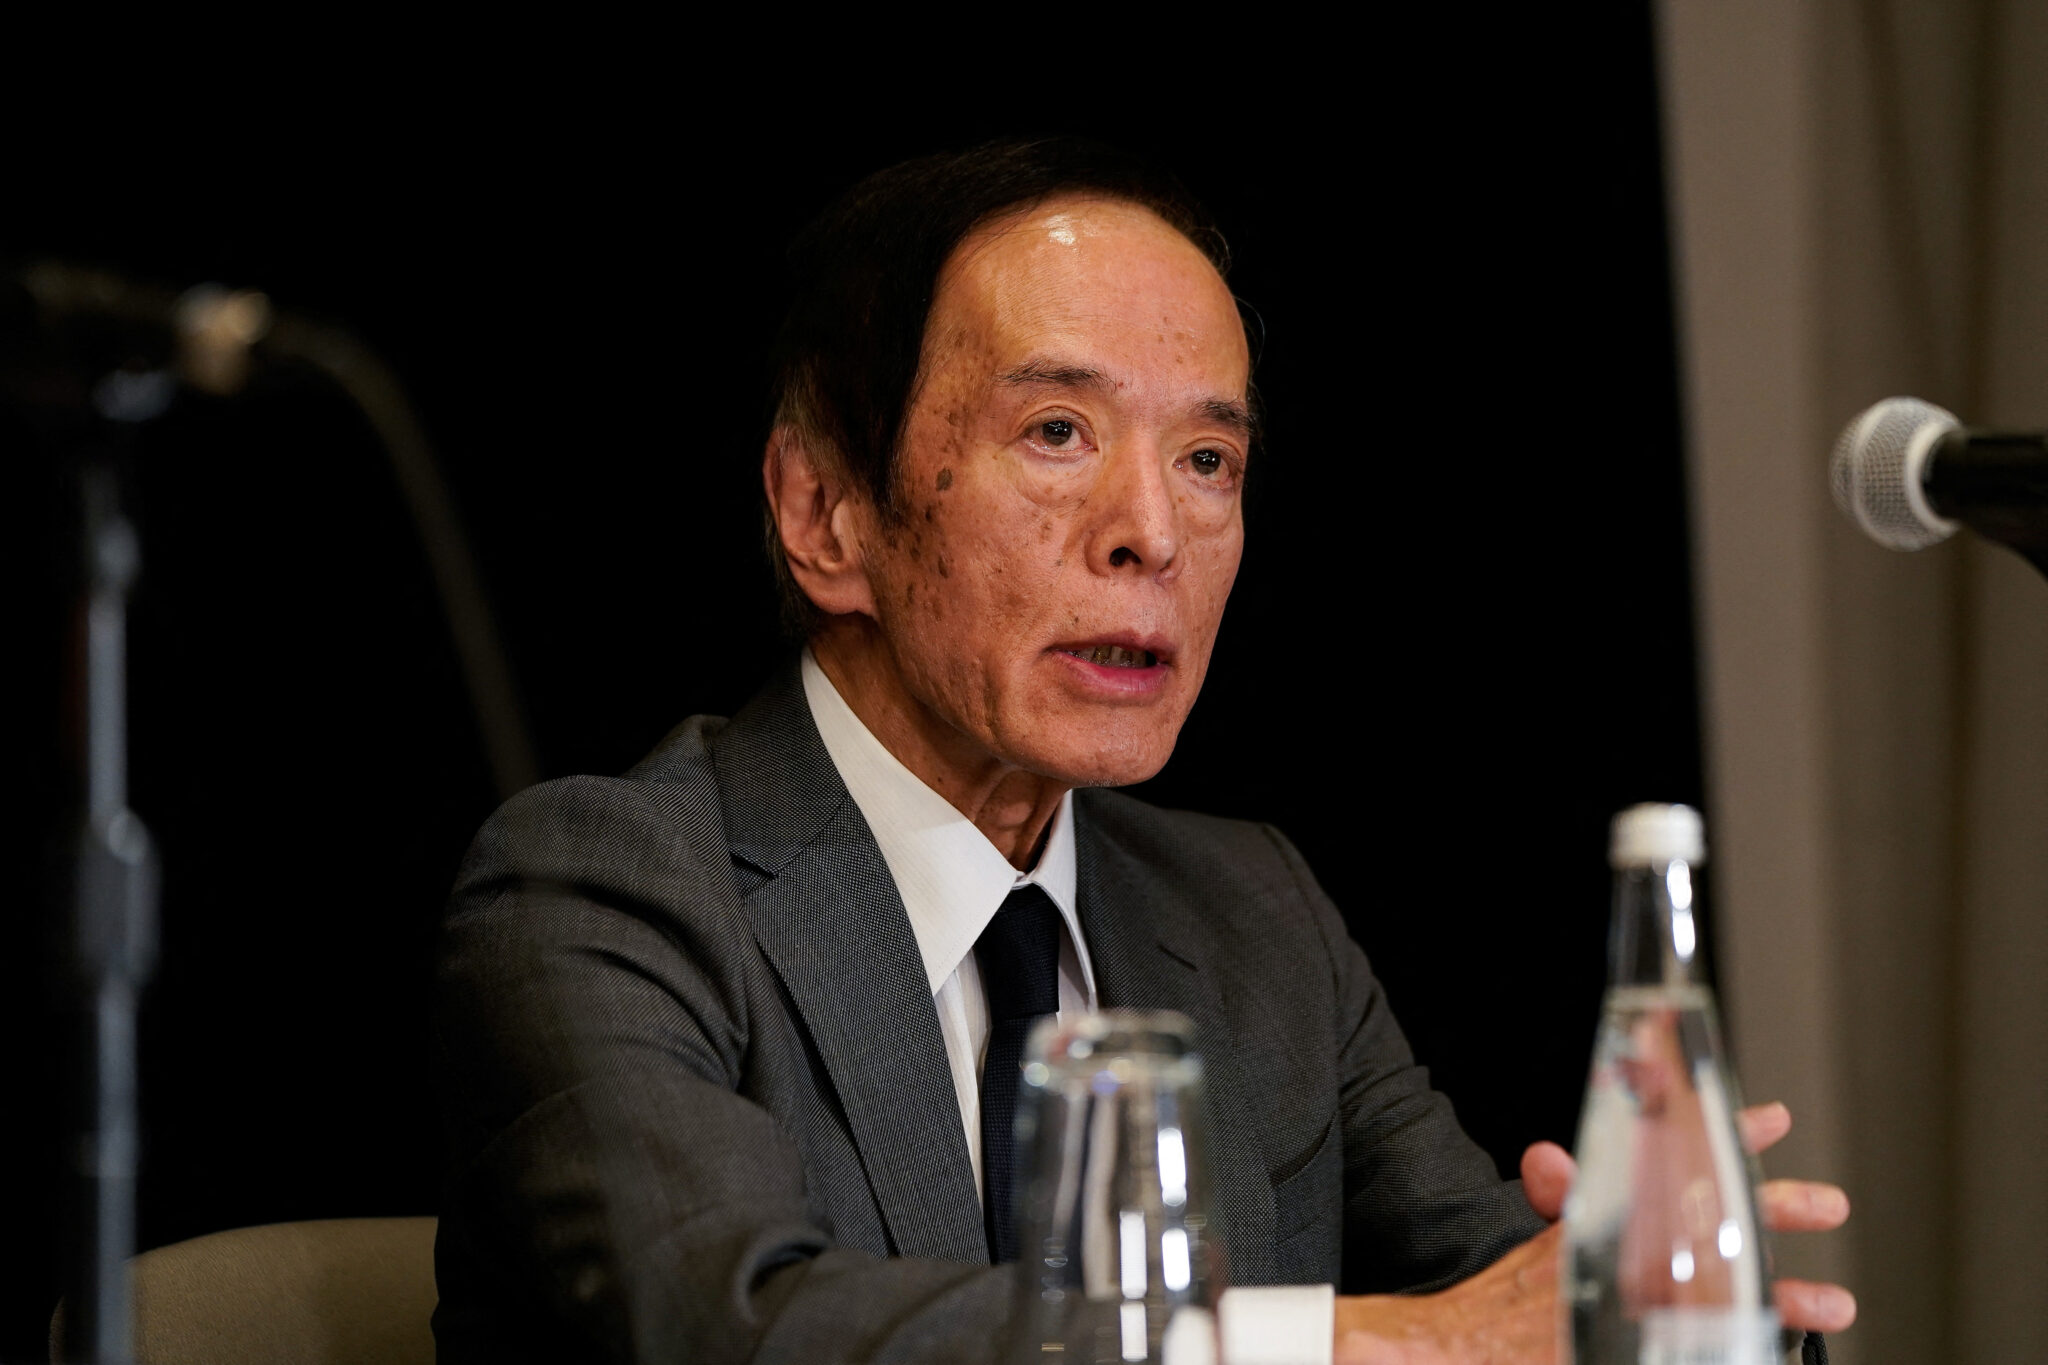 BOJ's new boss keeps ultralow rates, embarks on policy review